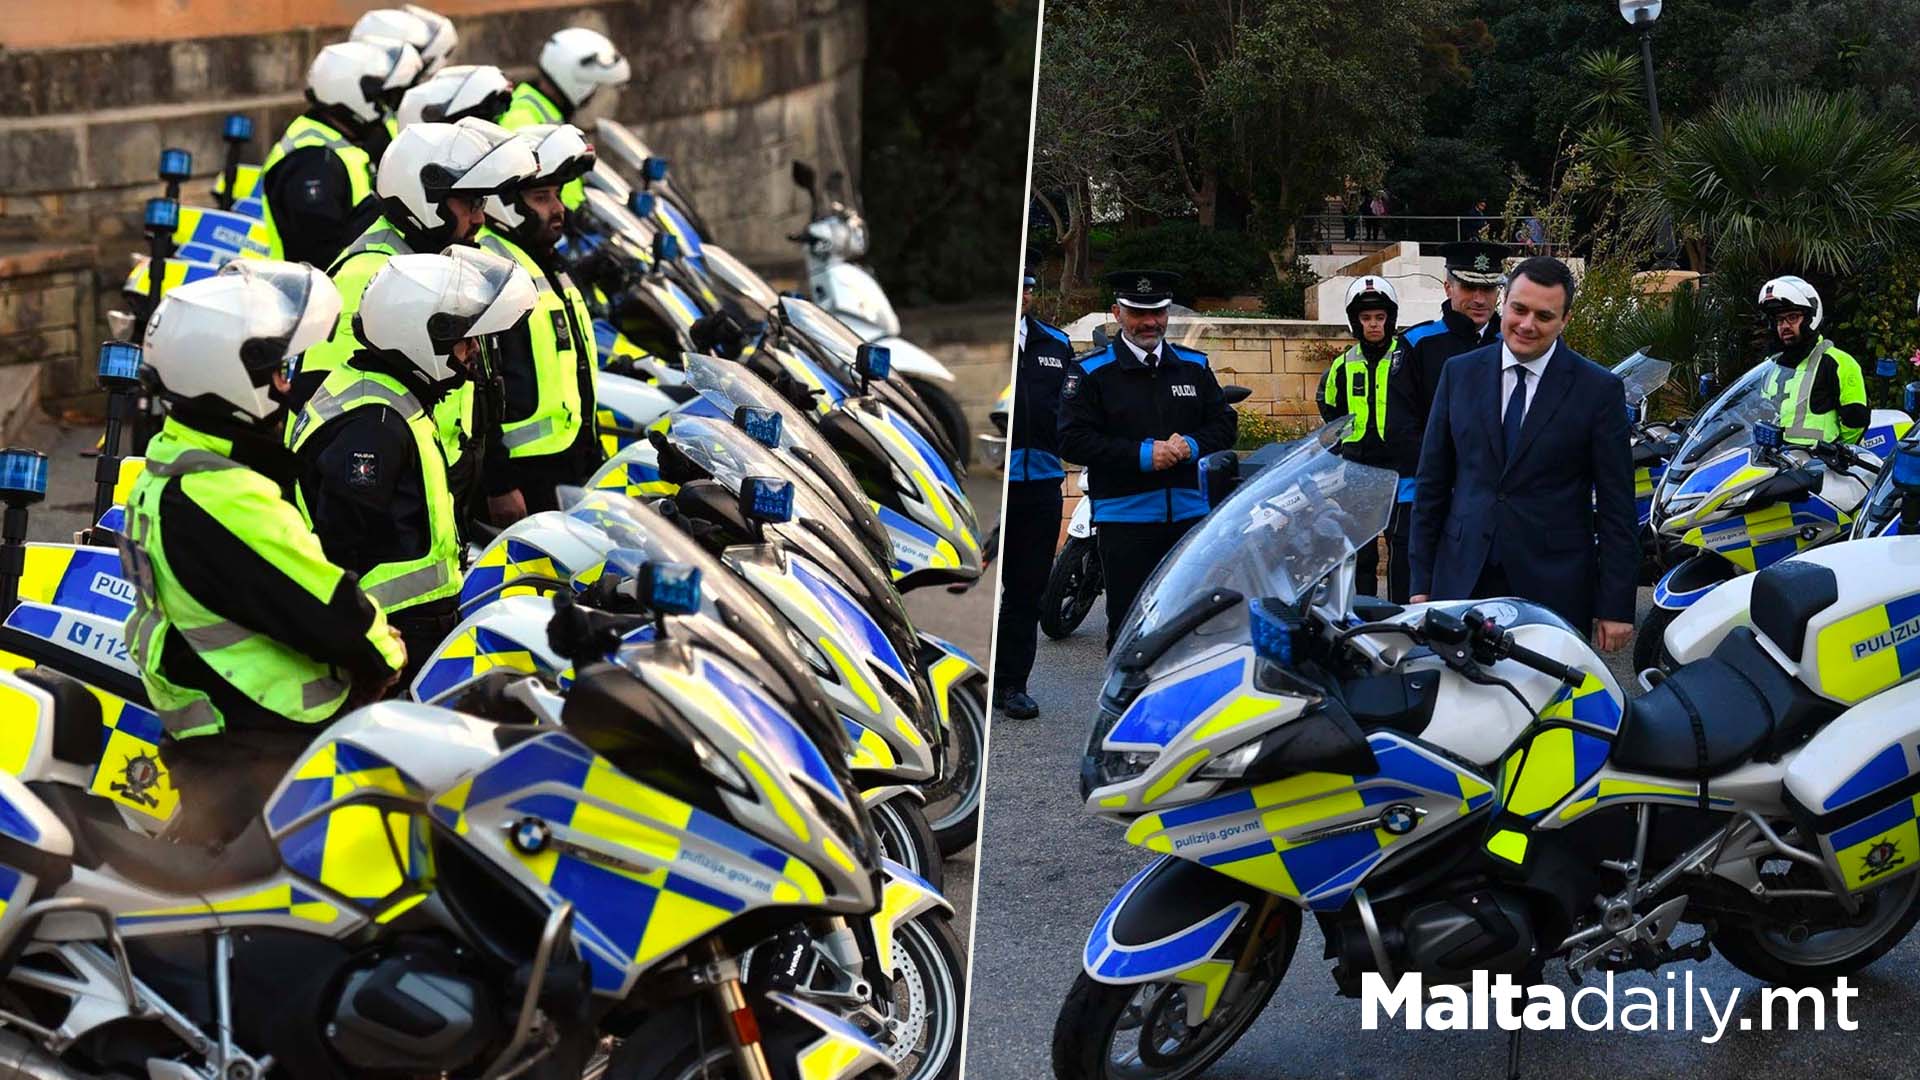 Fleet Of 24 New Police Motorcycles Inaugurated